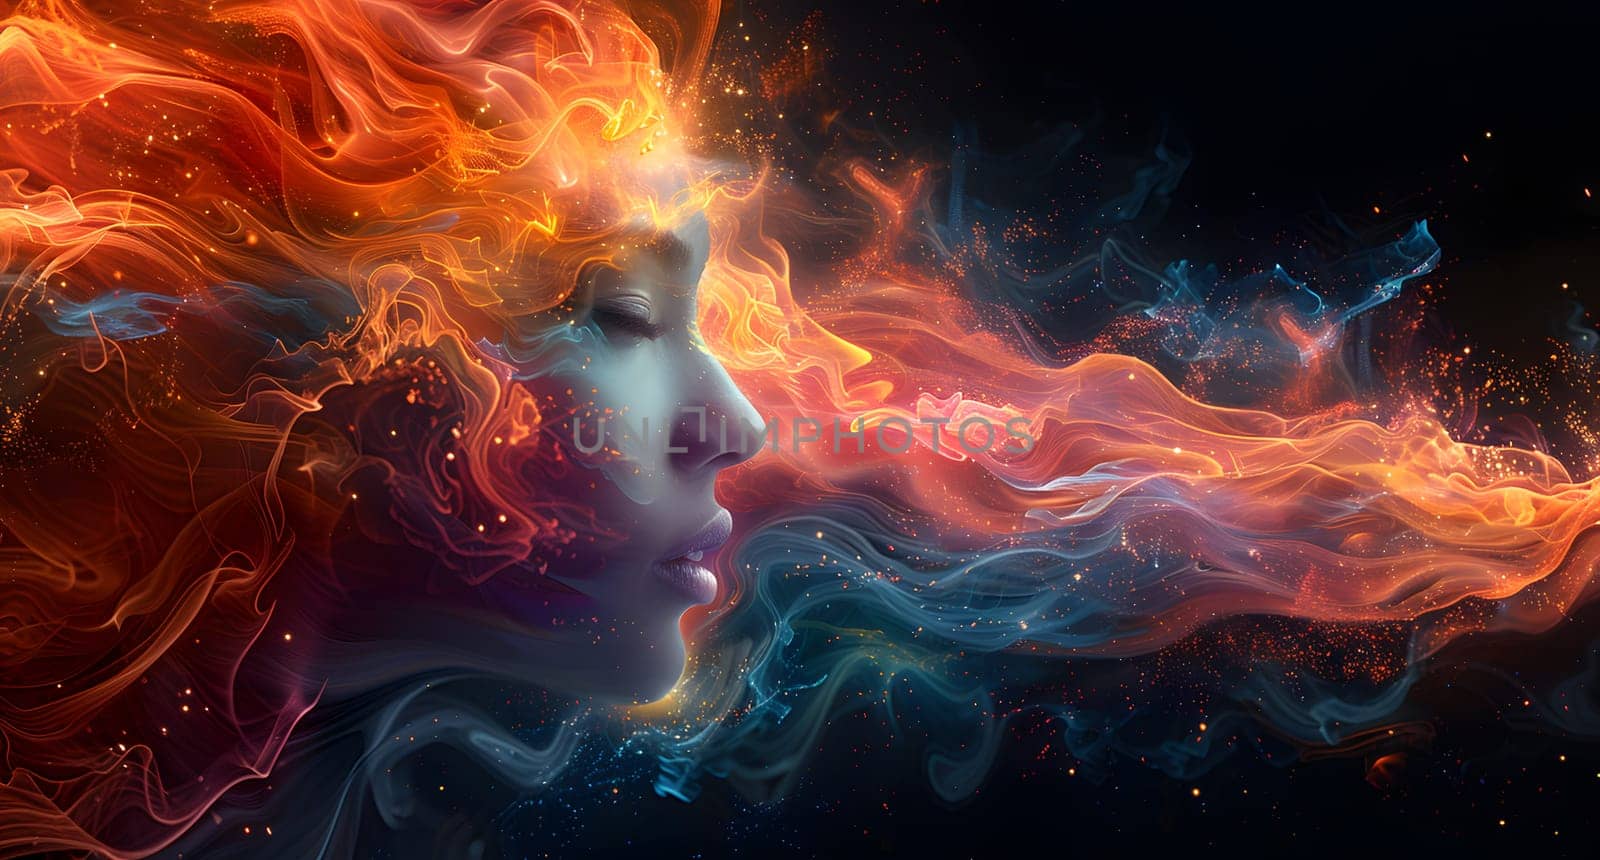 A woman with red hair is exhaling flames against an electric blue sky by Nadtochiy